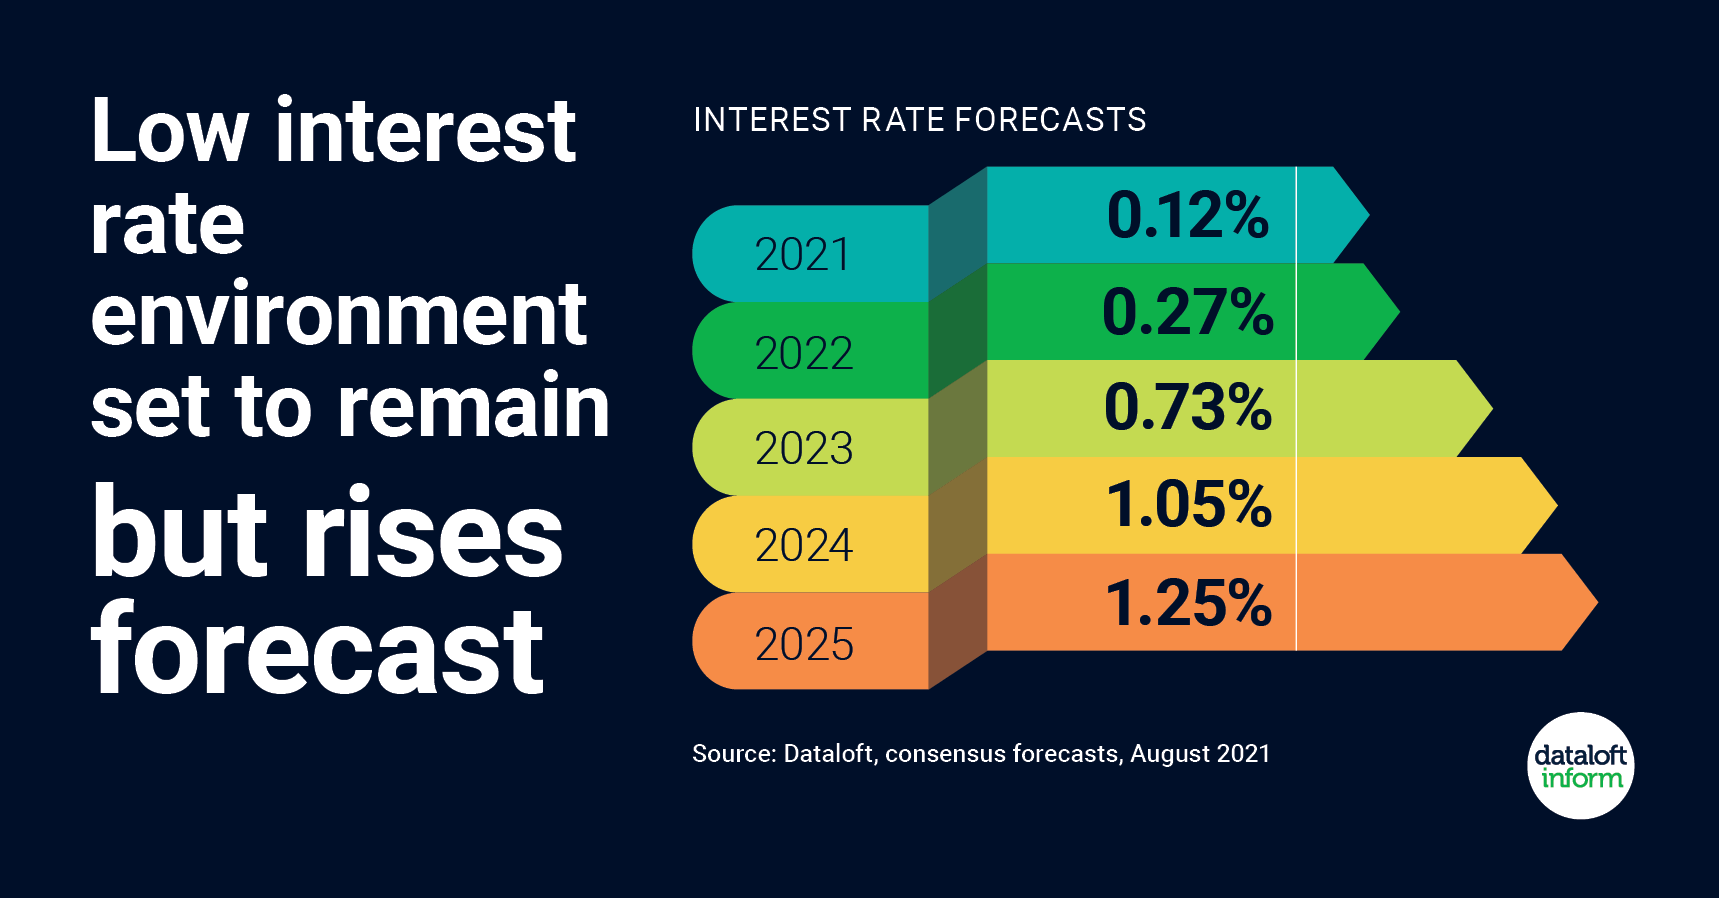 What next for interest rates